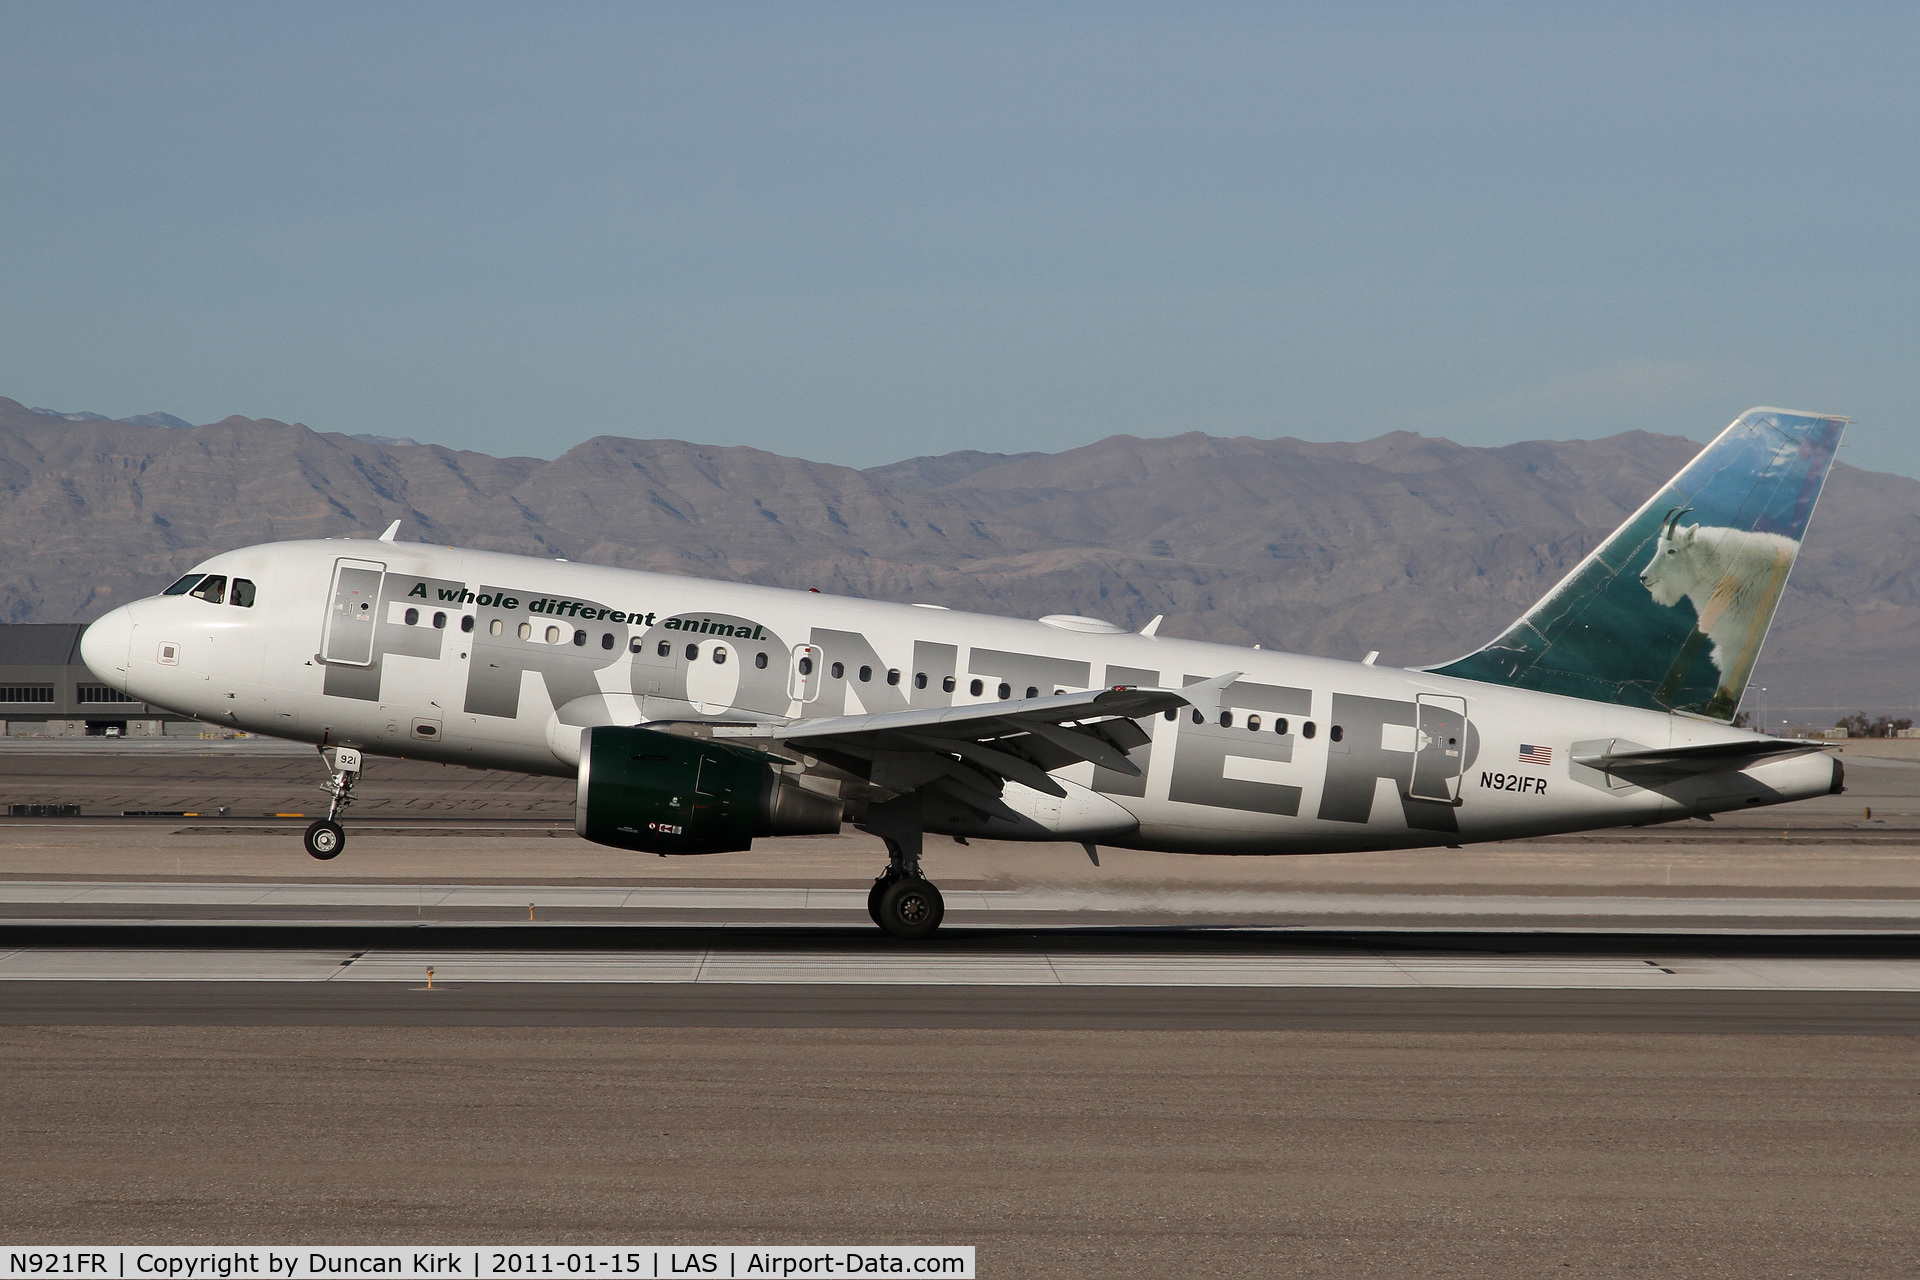 N921FR, 2003 Airbus A319-111 C/N 2010, How long will Frontier survive?